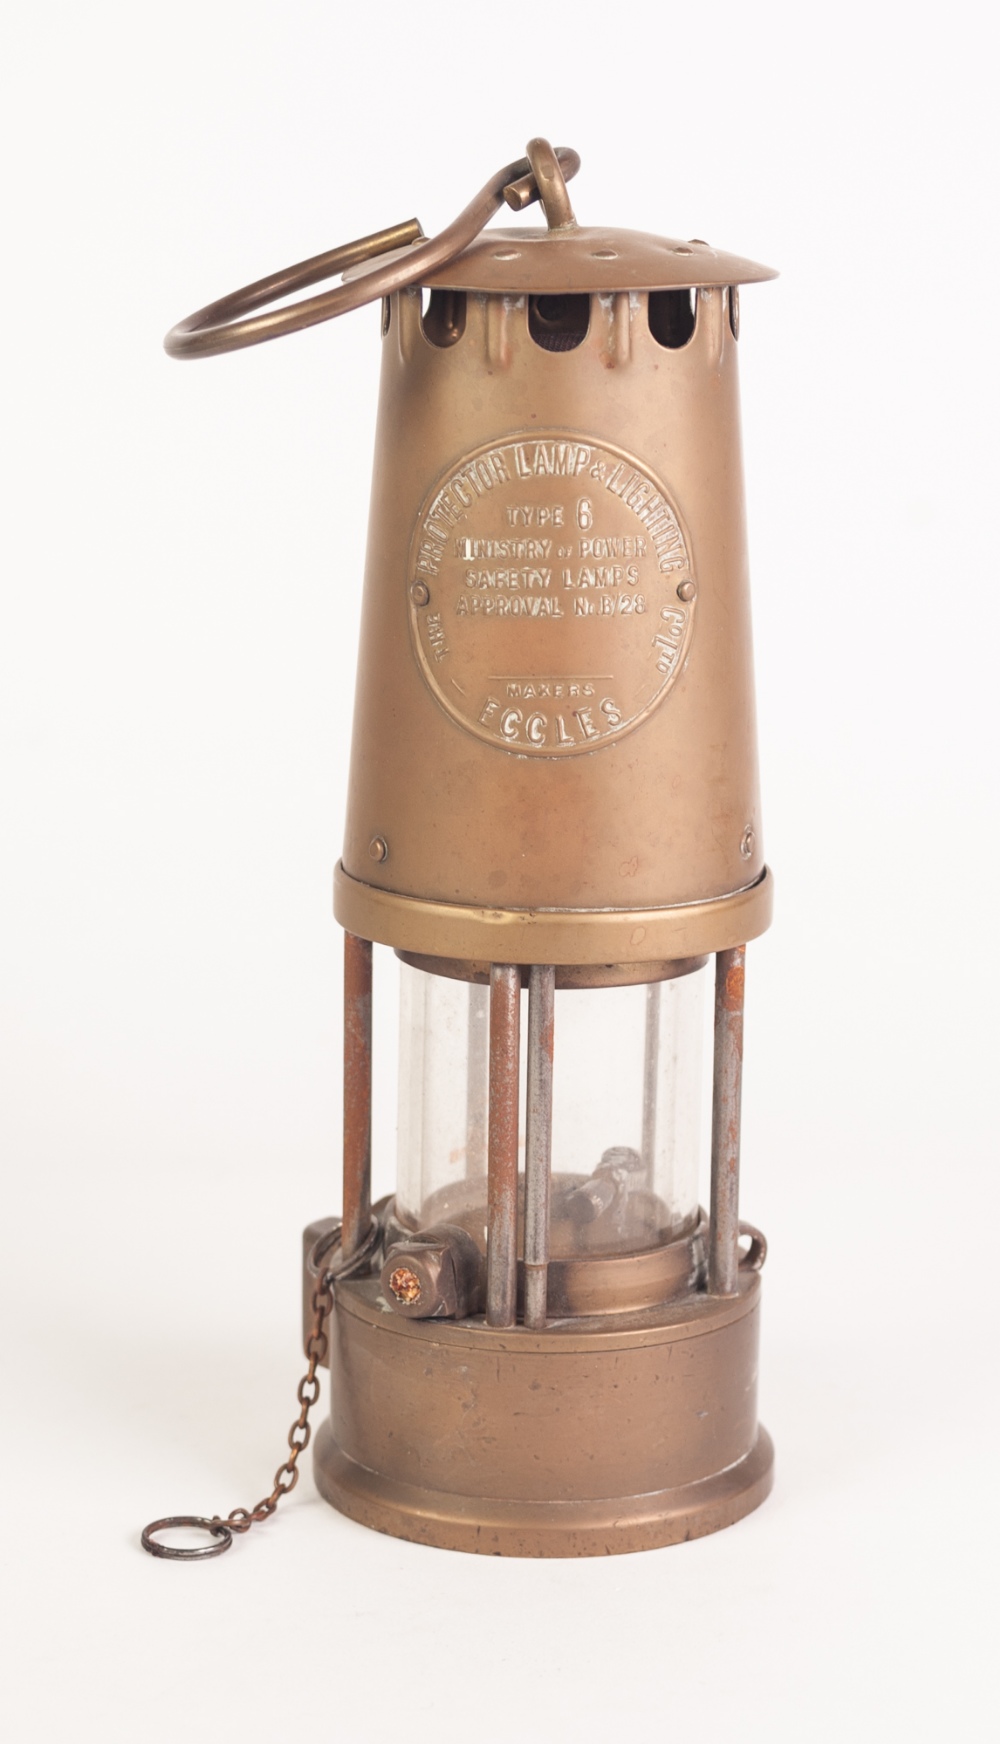 A BRASS CASED PROTECTOR LAMP AND LIGHTING TYPE 6 MINISTRY OF POWER MINERS SAFETY LAMP